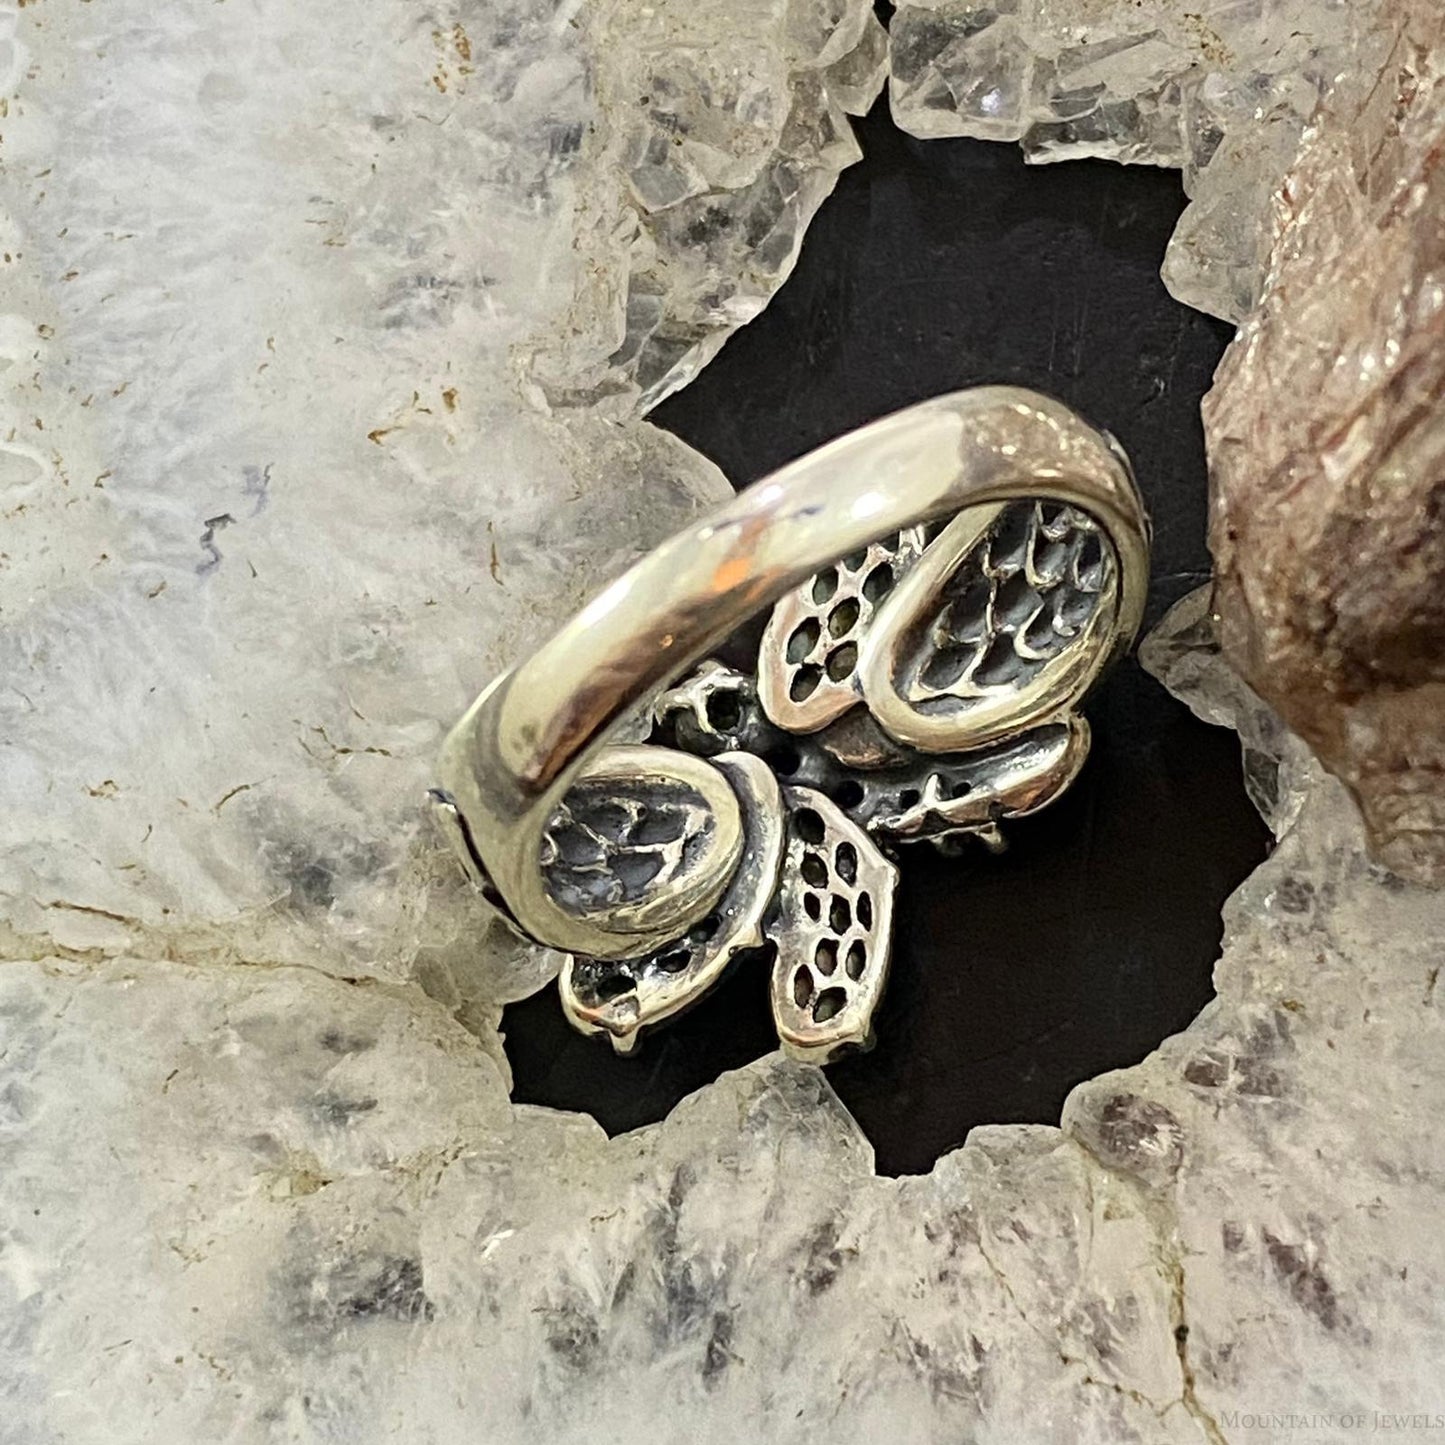 Carolyn Pollack Southwestern Style Sterling Silver Abalone, Amethyst & Peridot Dragonfly Ring For Women